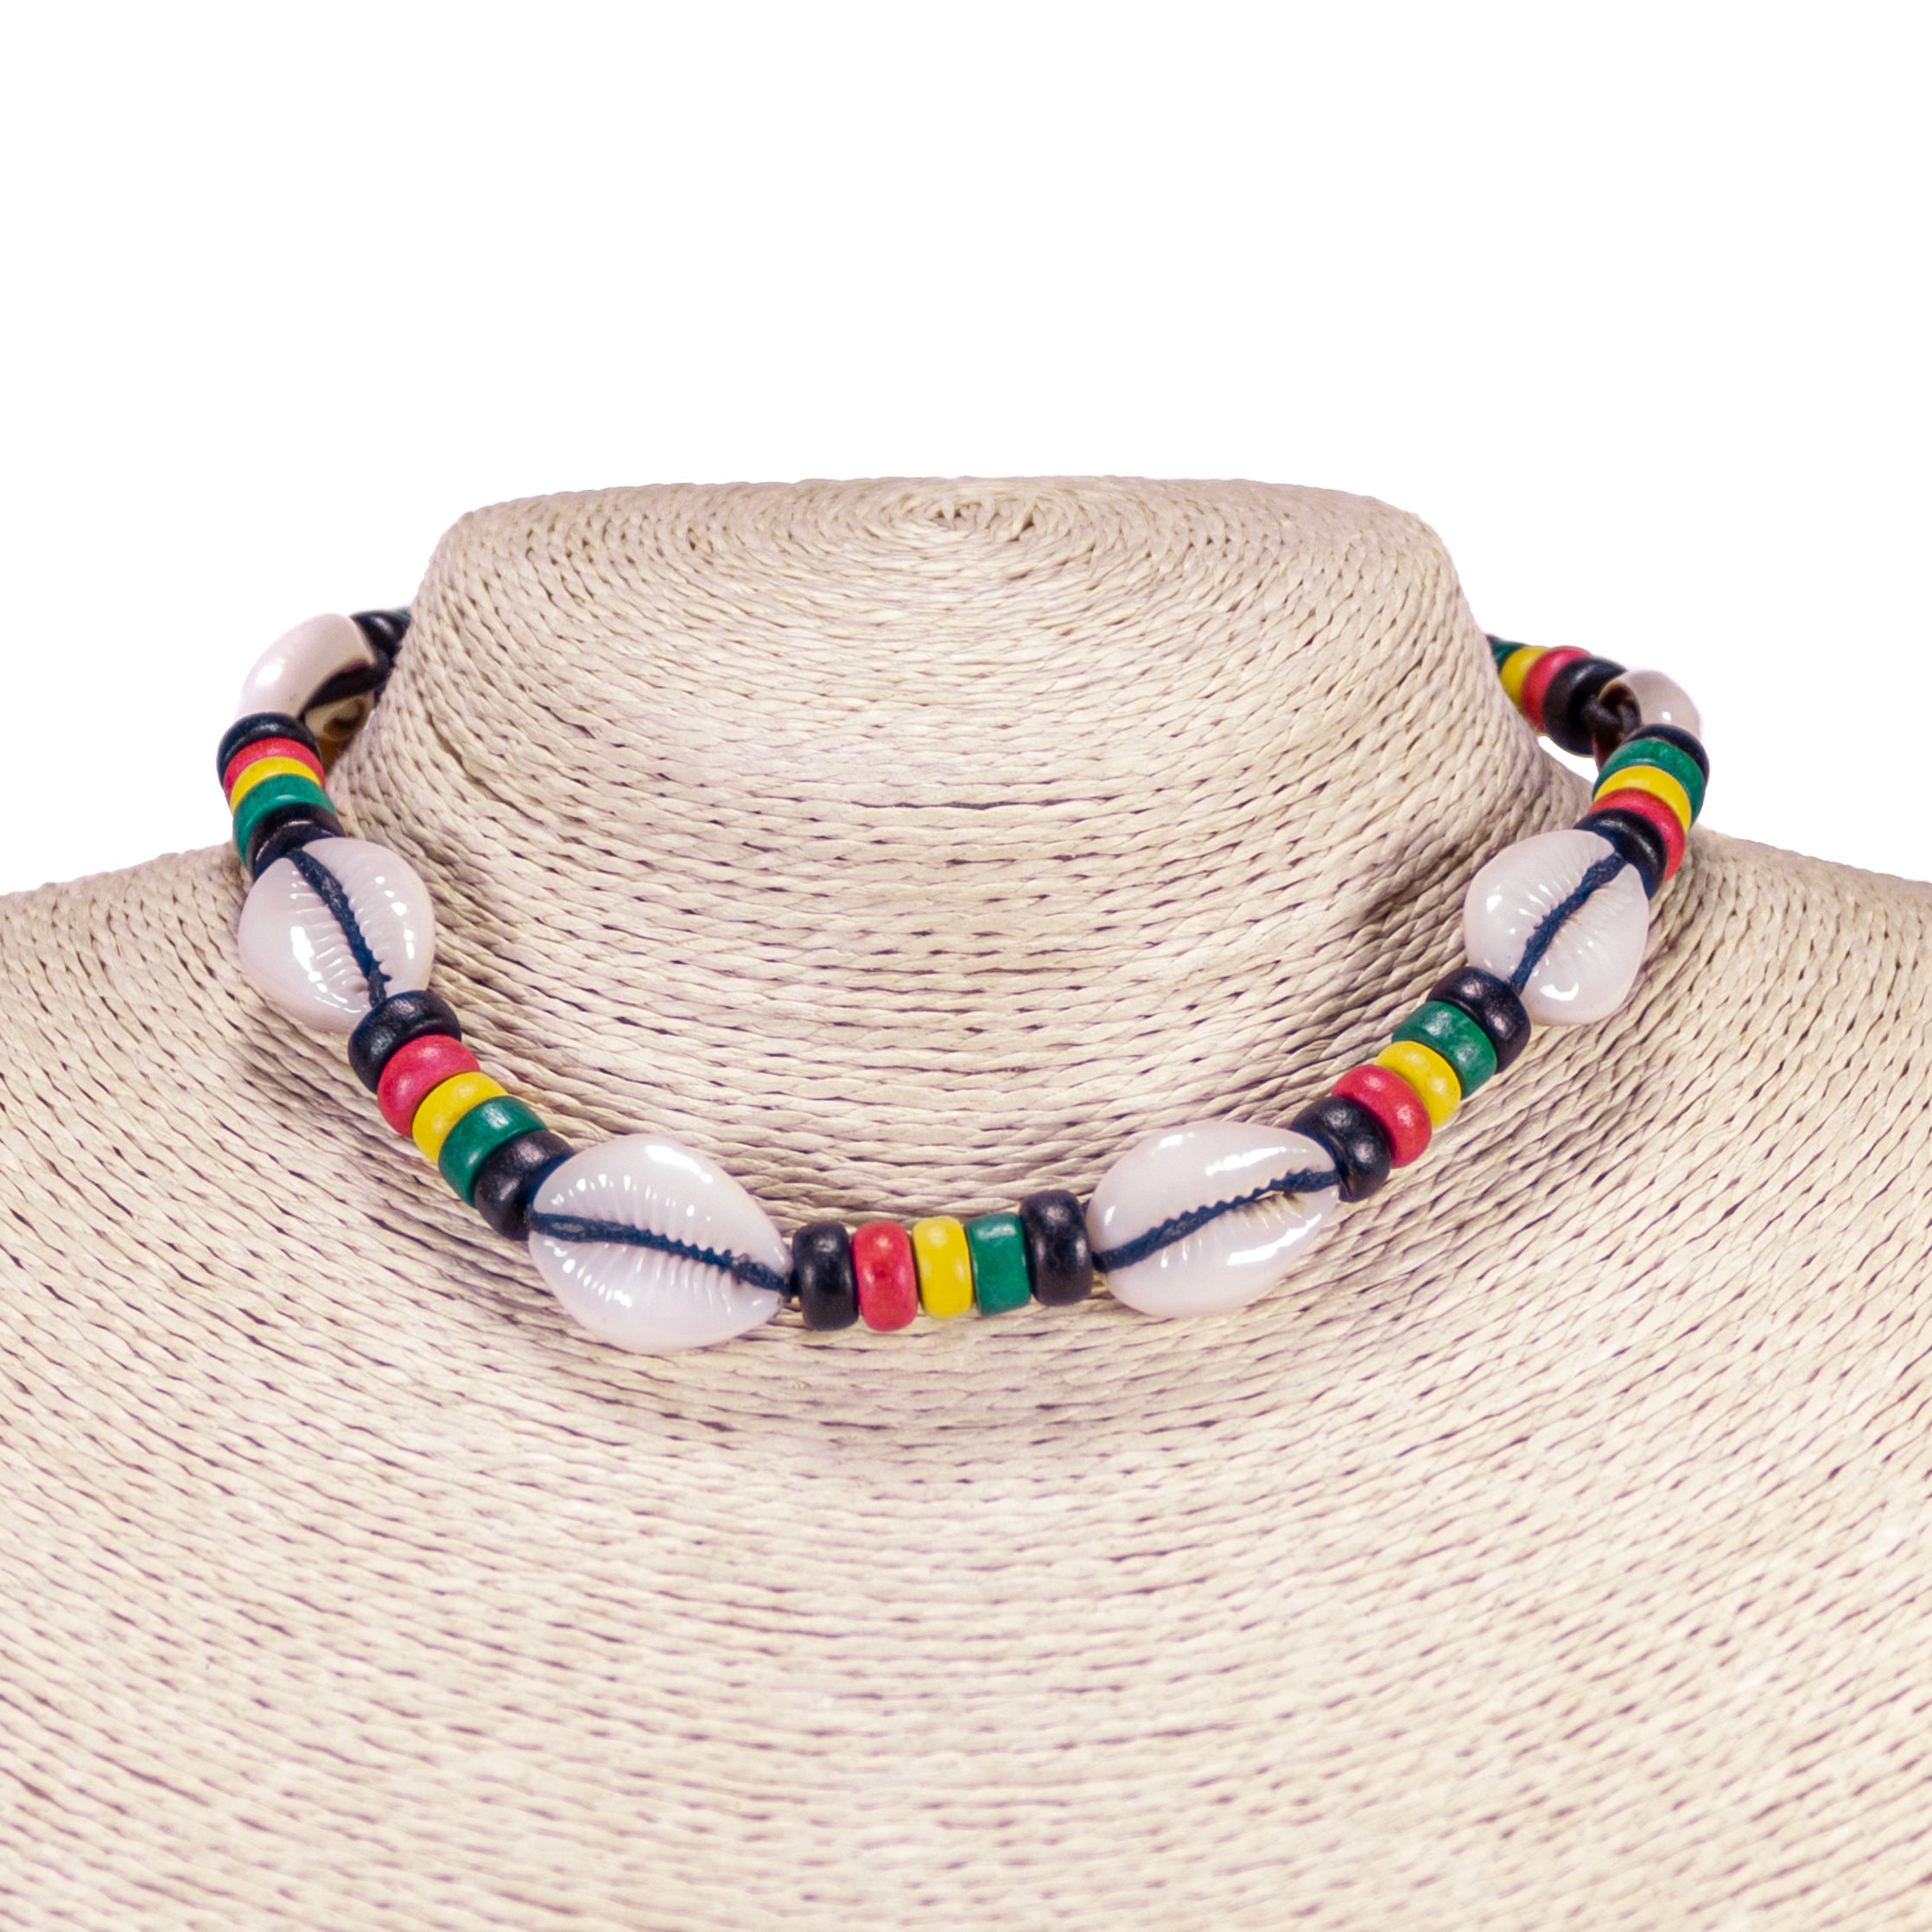 Cowrie Shell and Rasta Coconut Beads Choker Necklace